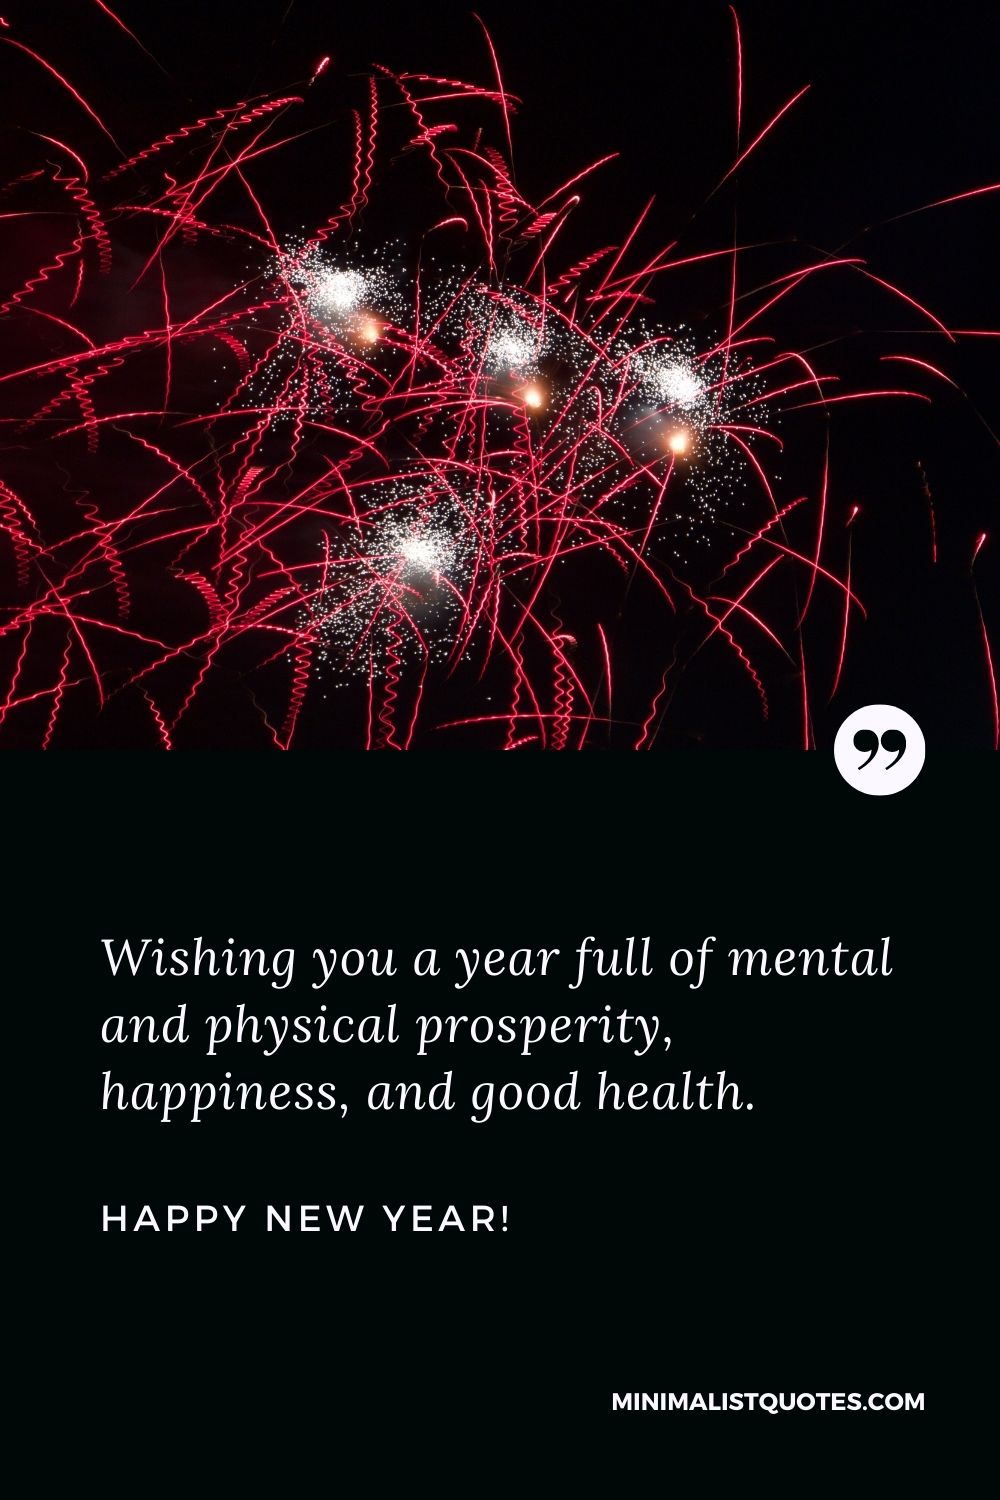 Happy New Year Wishes: Wishing you a year full of mental and physical prosperity, happiness, and good health. Happy New Year!